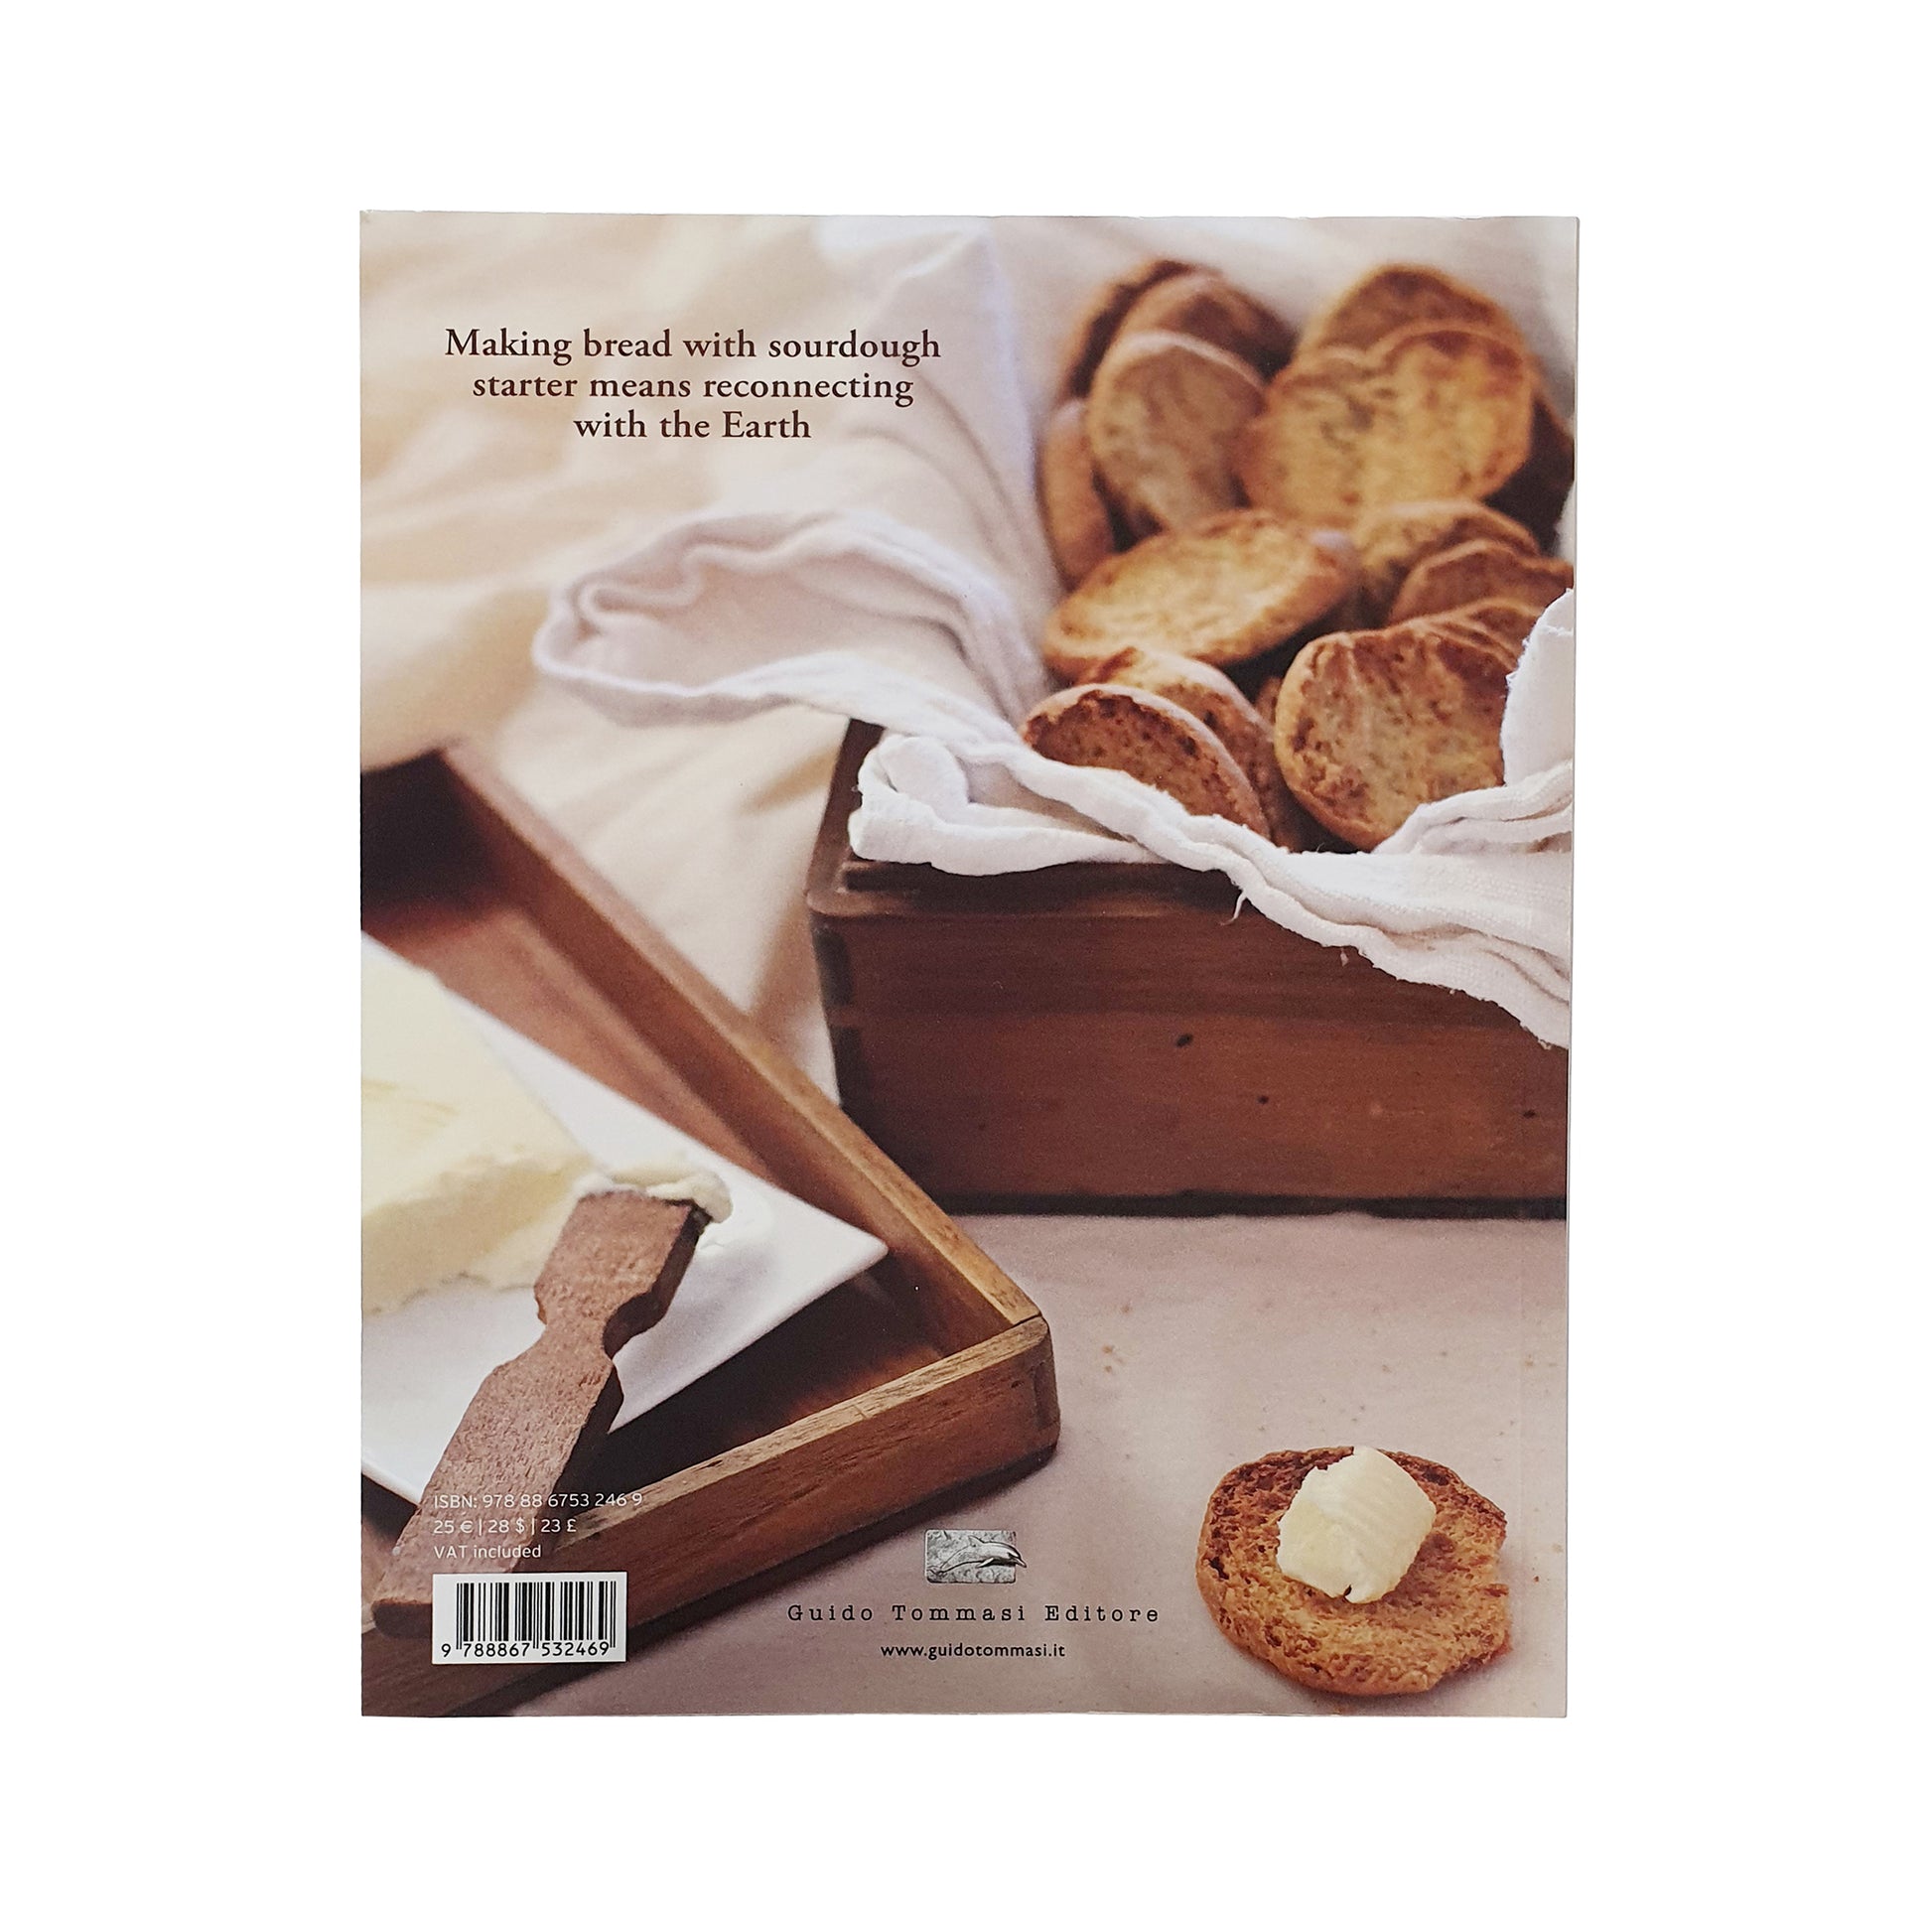 complete guide to sourdough book back cover